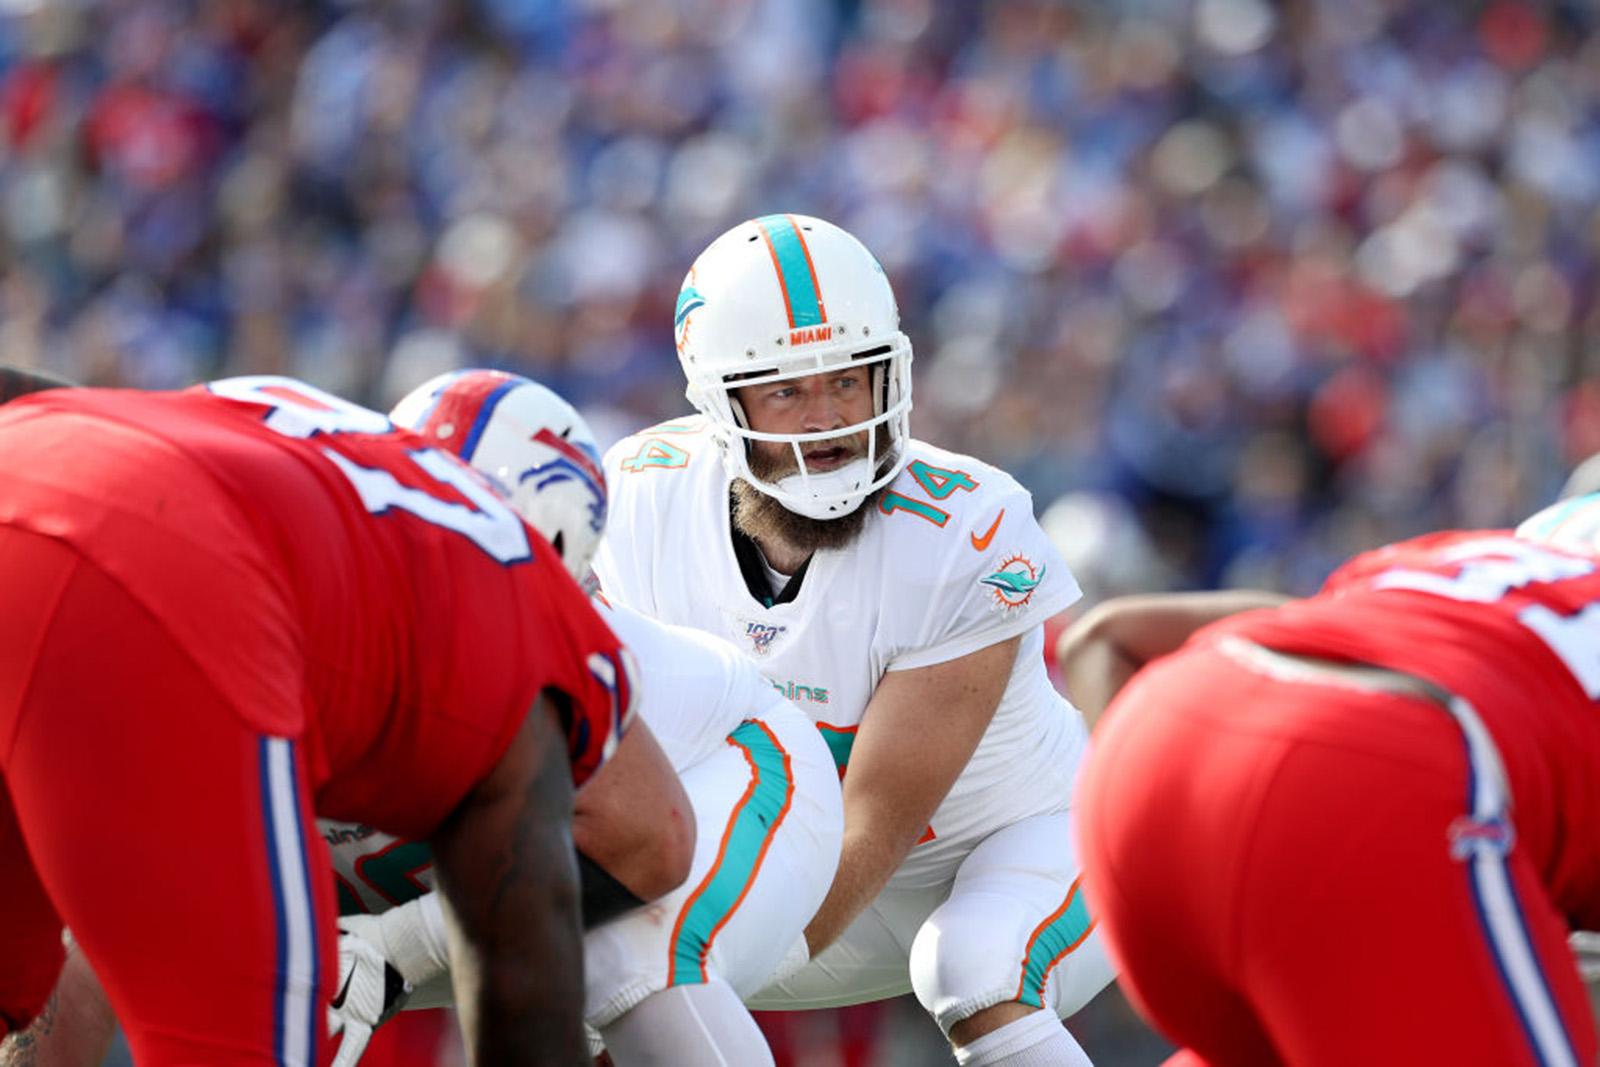 Ryan Fitzpatrick #14 of the Miami Dolphins looks to his left during the third quarter of an NFL game against the Buffalo Bills at New Era Field on October 20, 2019 in Orchard Park, New York. (Bryan M. Bennett/Getty Images/TNS)